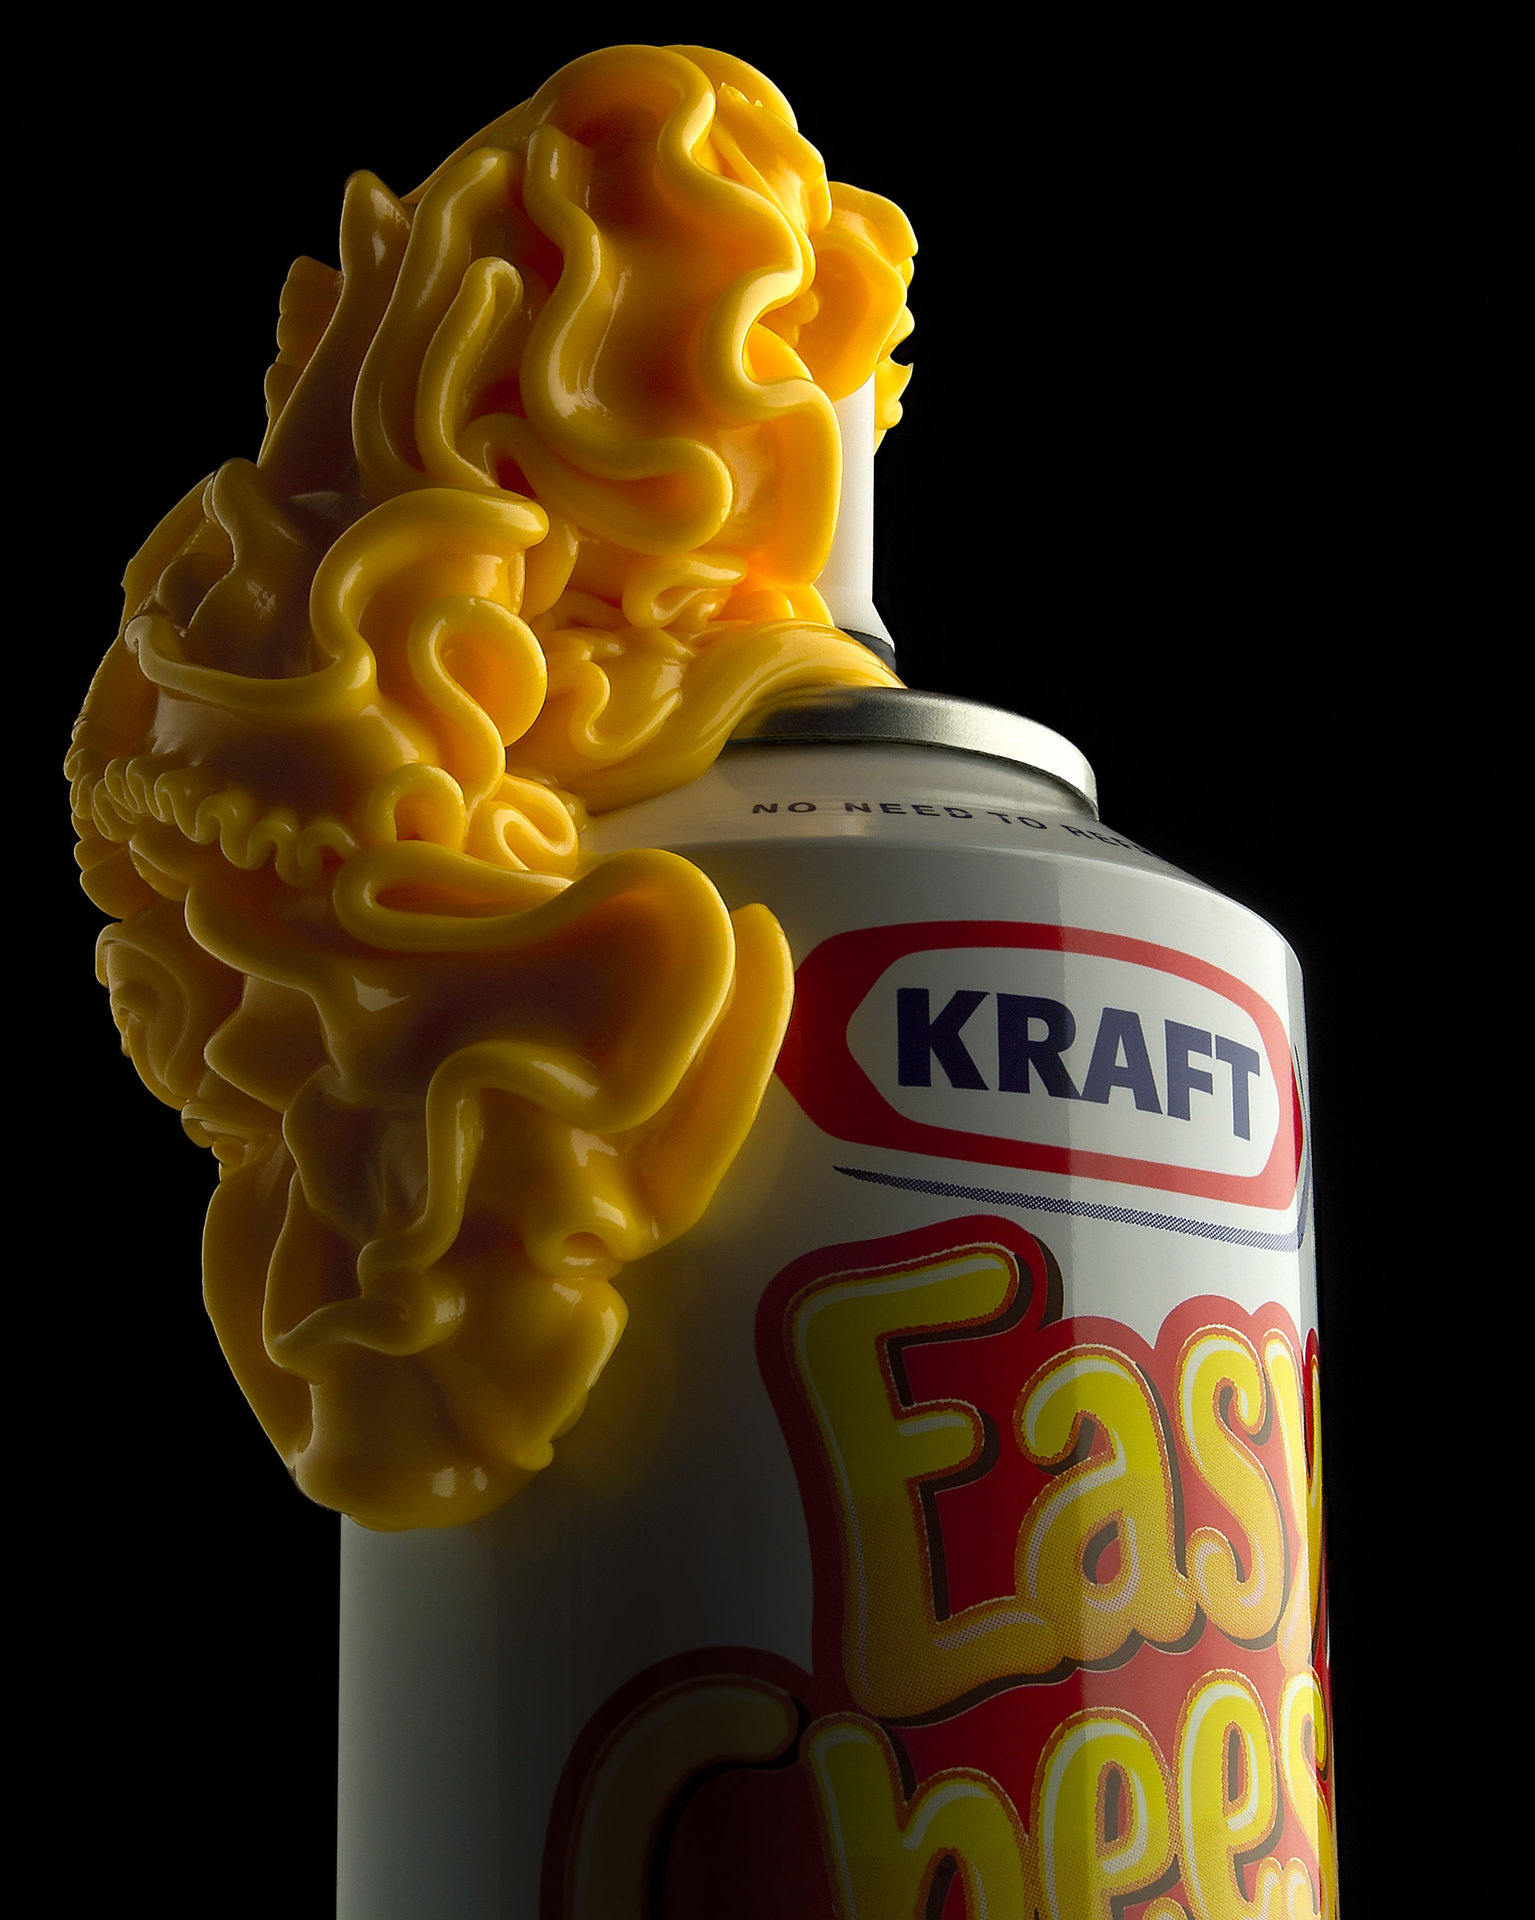 Cheese in an aerosol can? Madness.